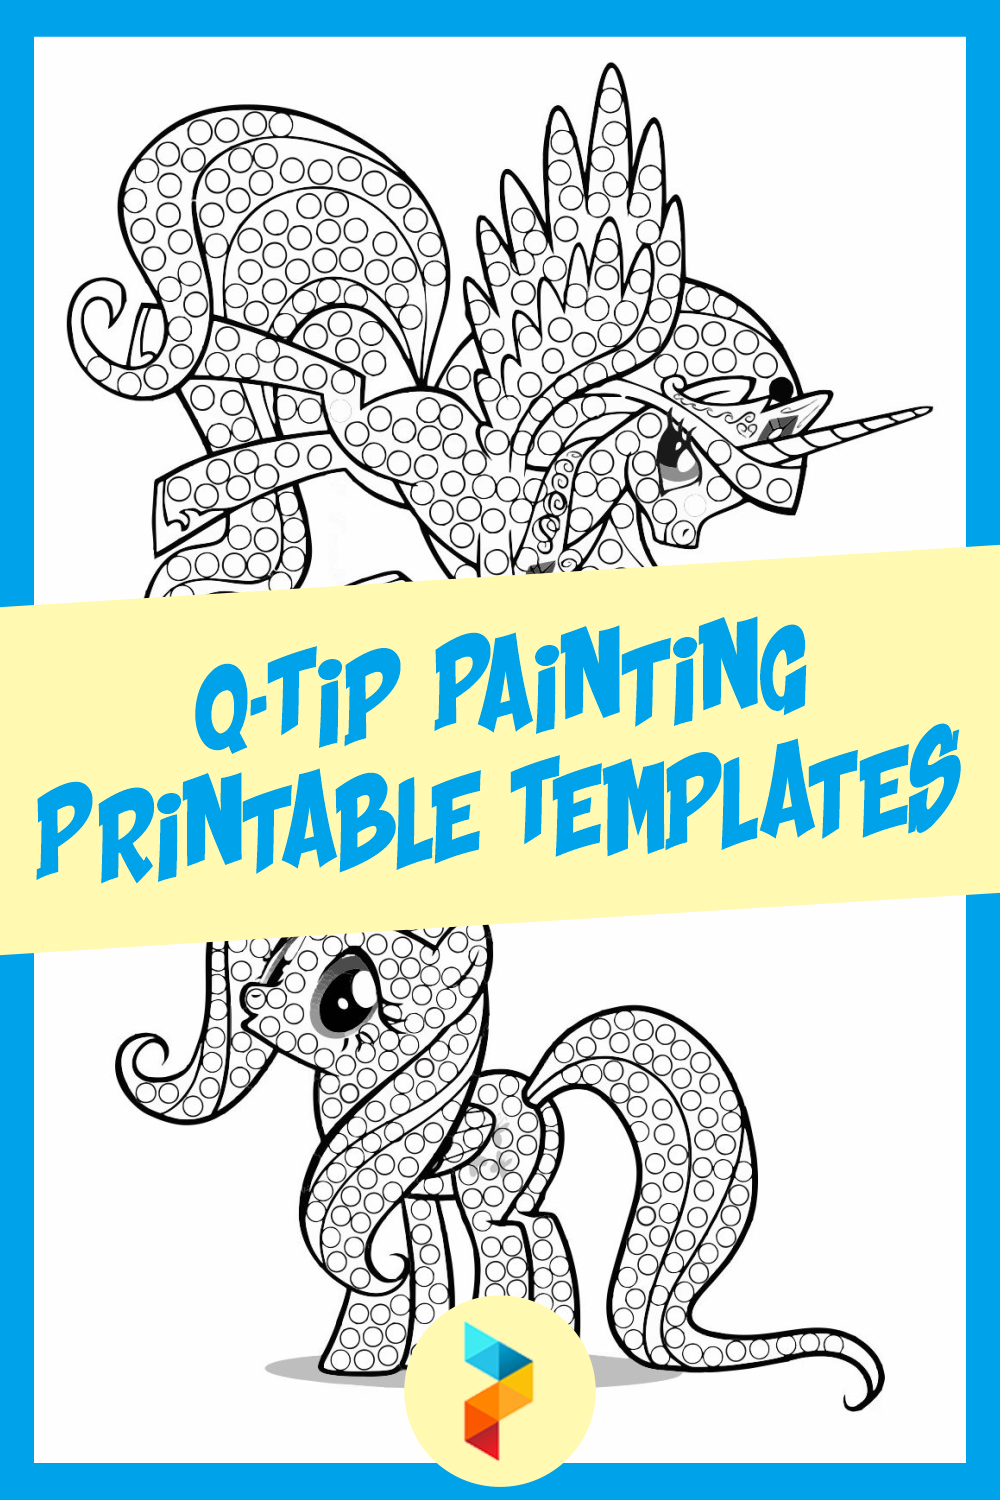 Q-Tip Painting Printable Templates